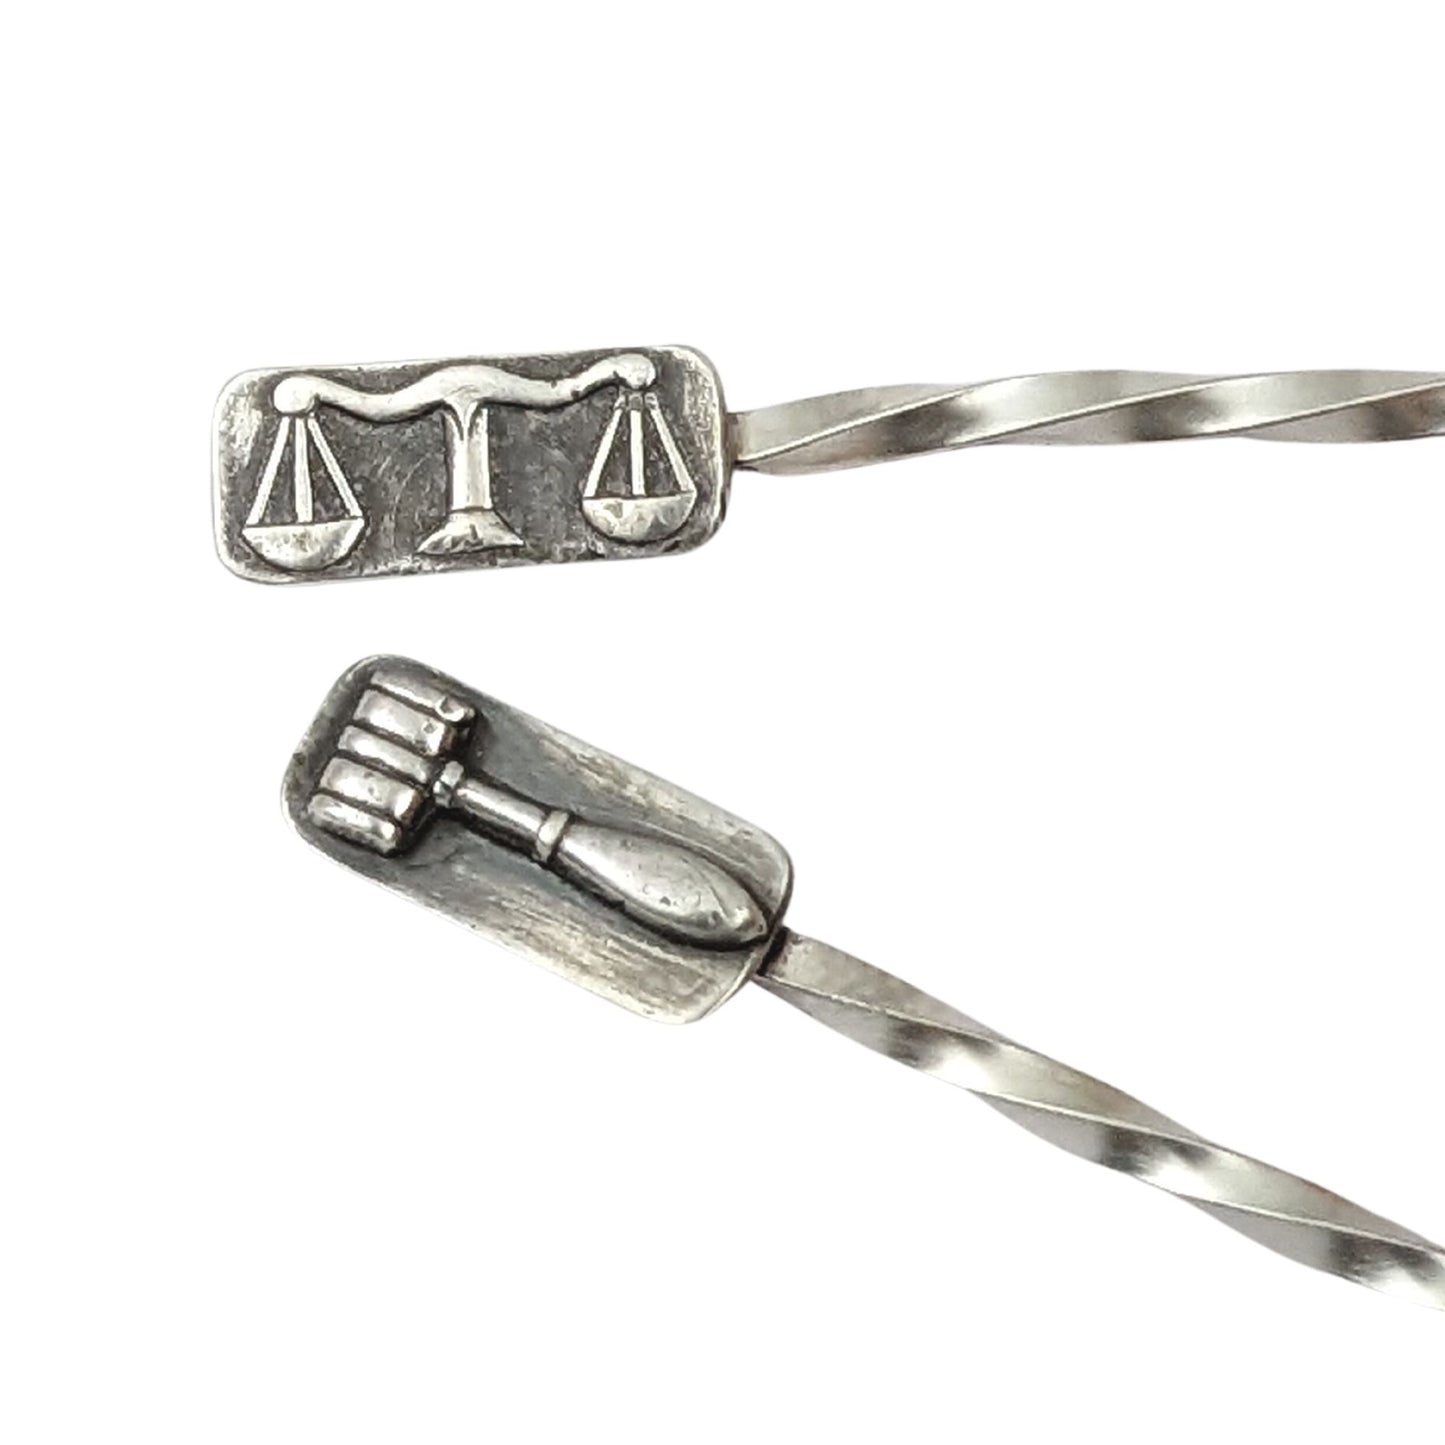 Sterling silver cocktail pick. One pick has the scales of justice at the top, the other has a gavel. Wire portion of the pick is twisted.